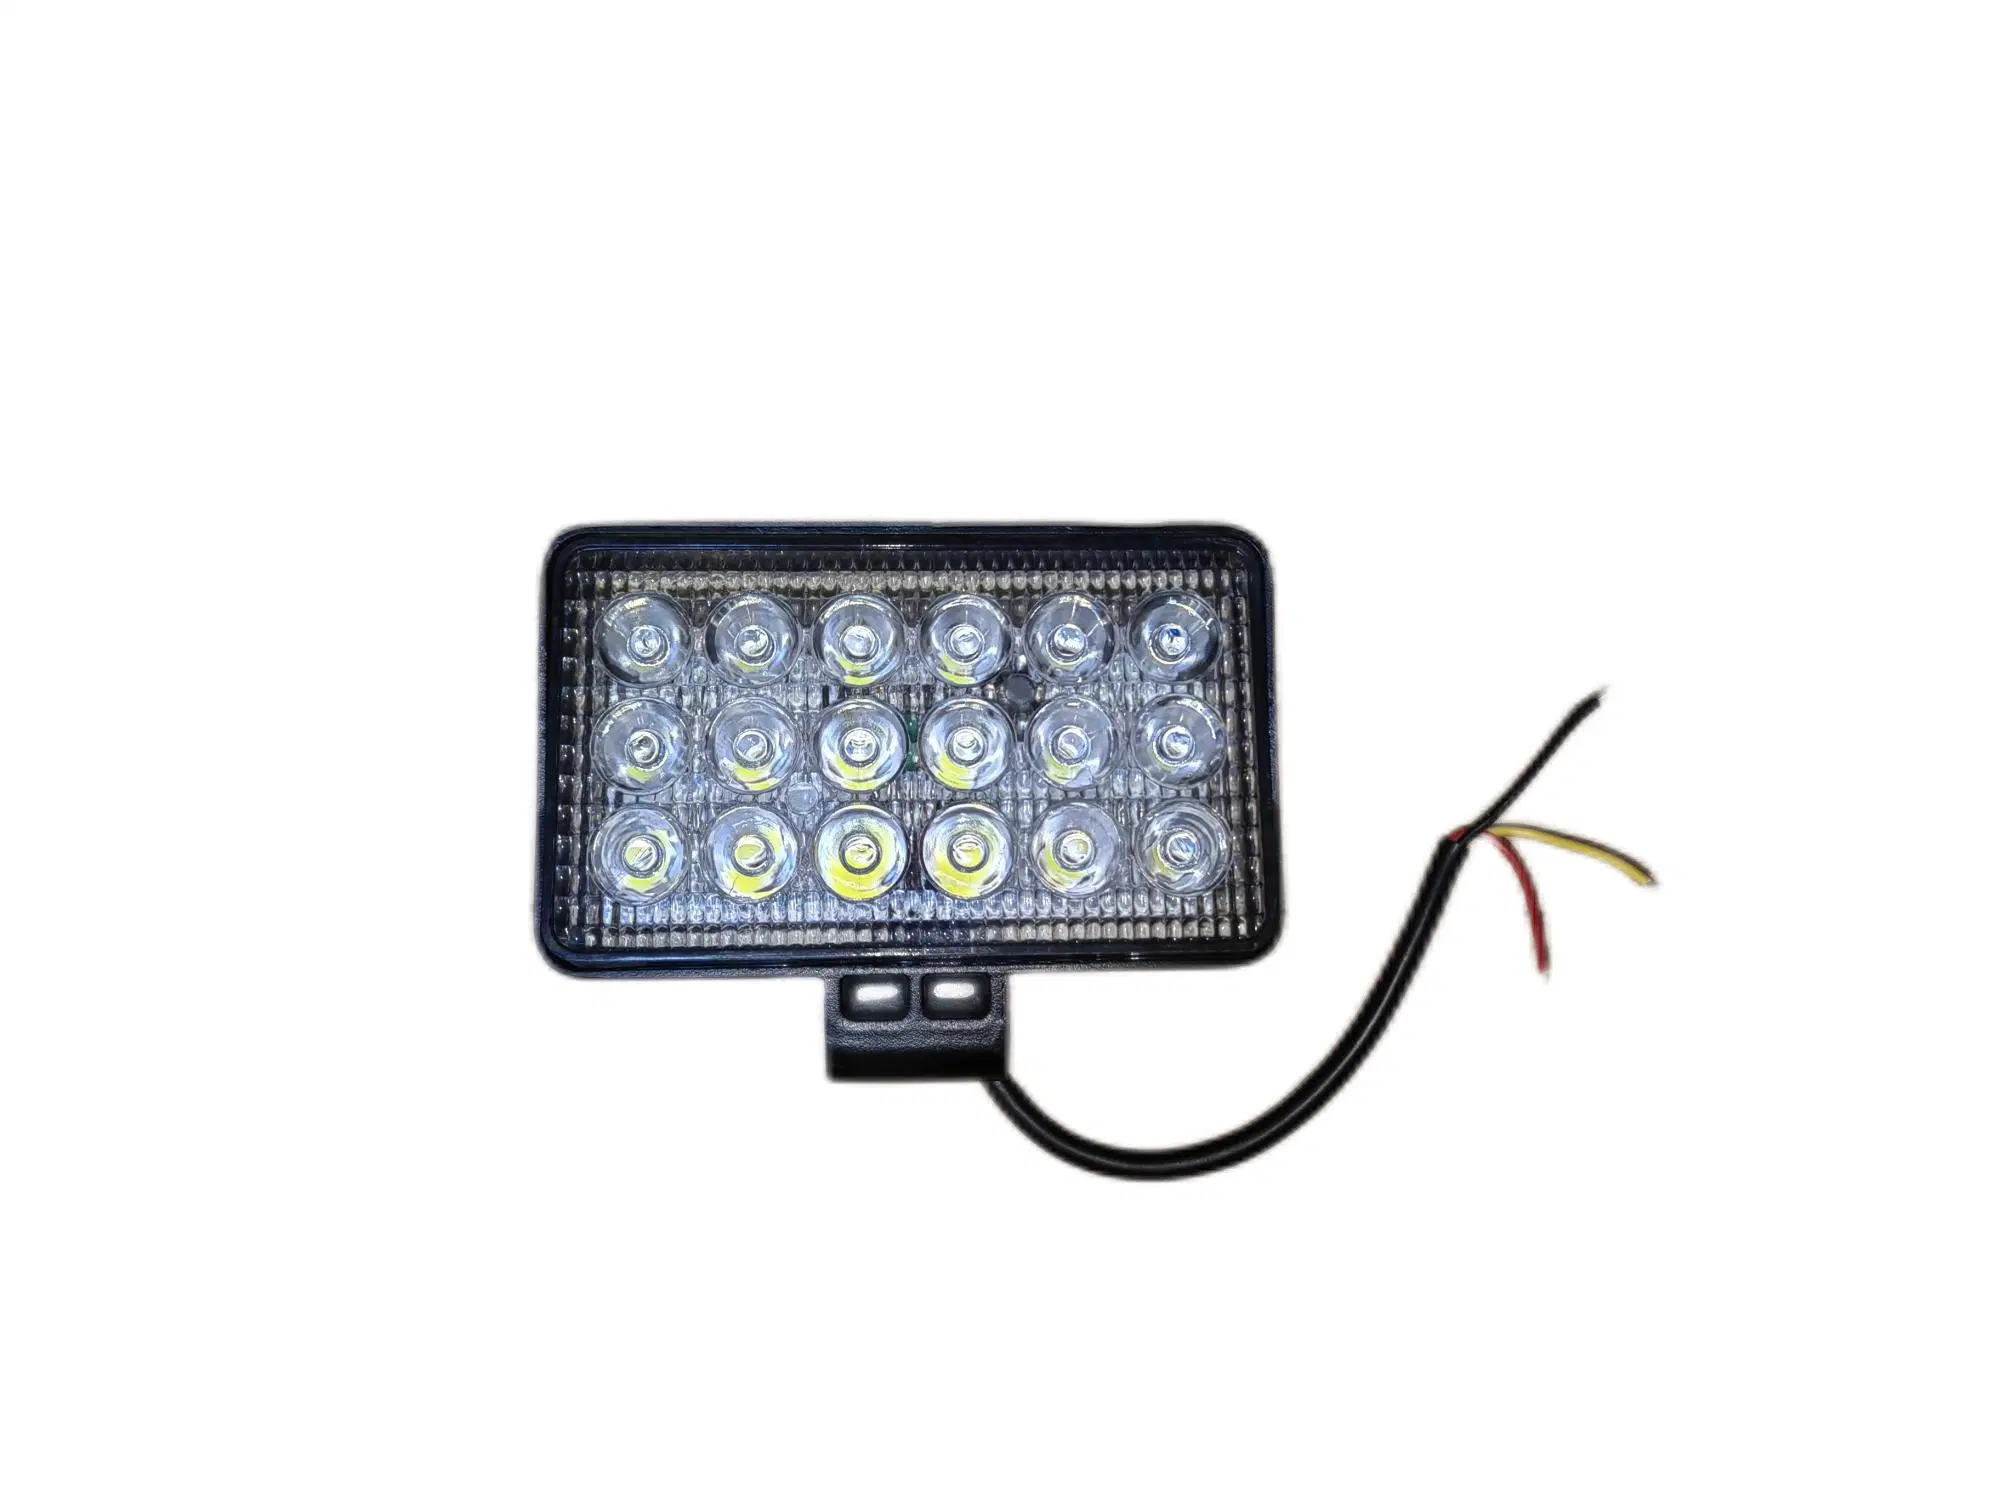 18 LED Square Fog Lamp 54W Working Lamp for Construction Vehicles. for Truck